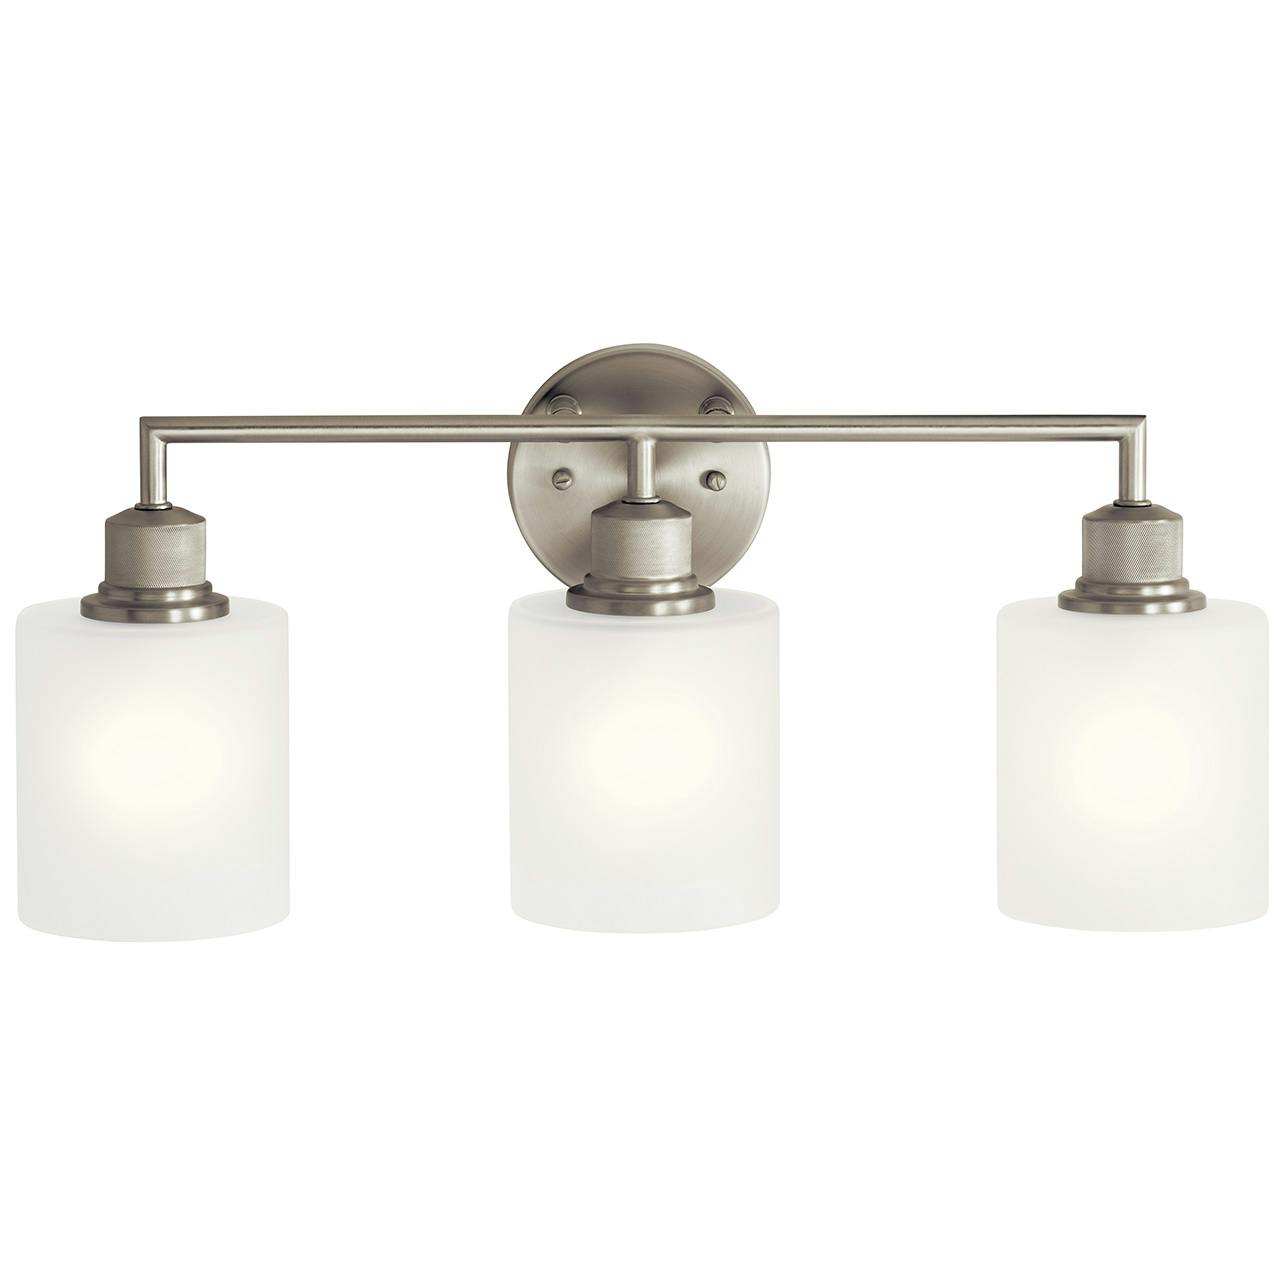 The Lynn Haven 3 Light Vanity Light Nickel facing down on a white background